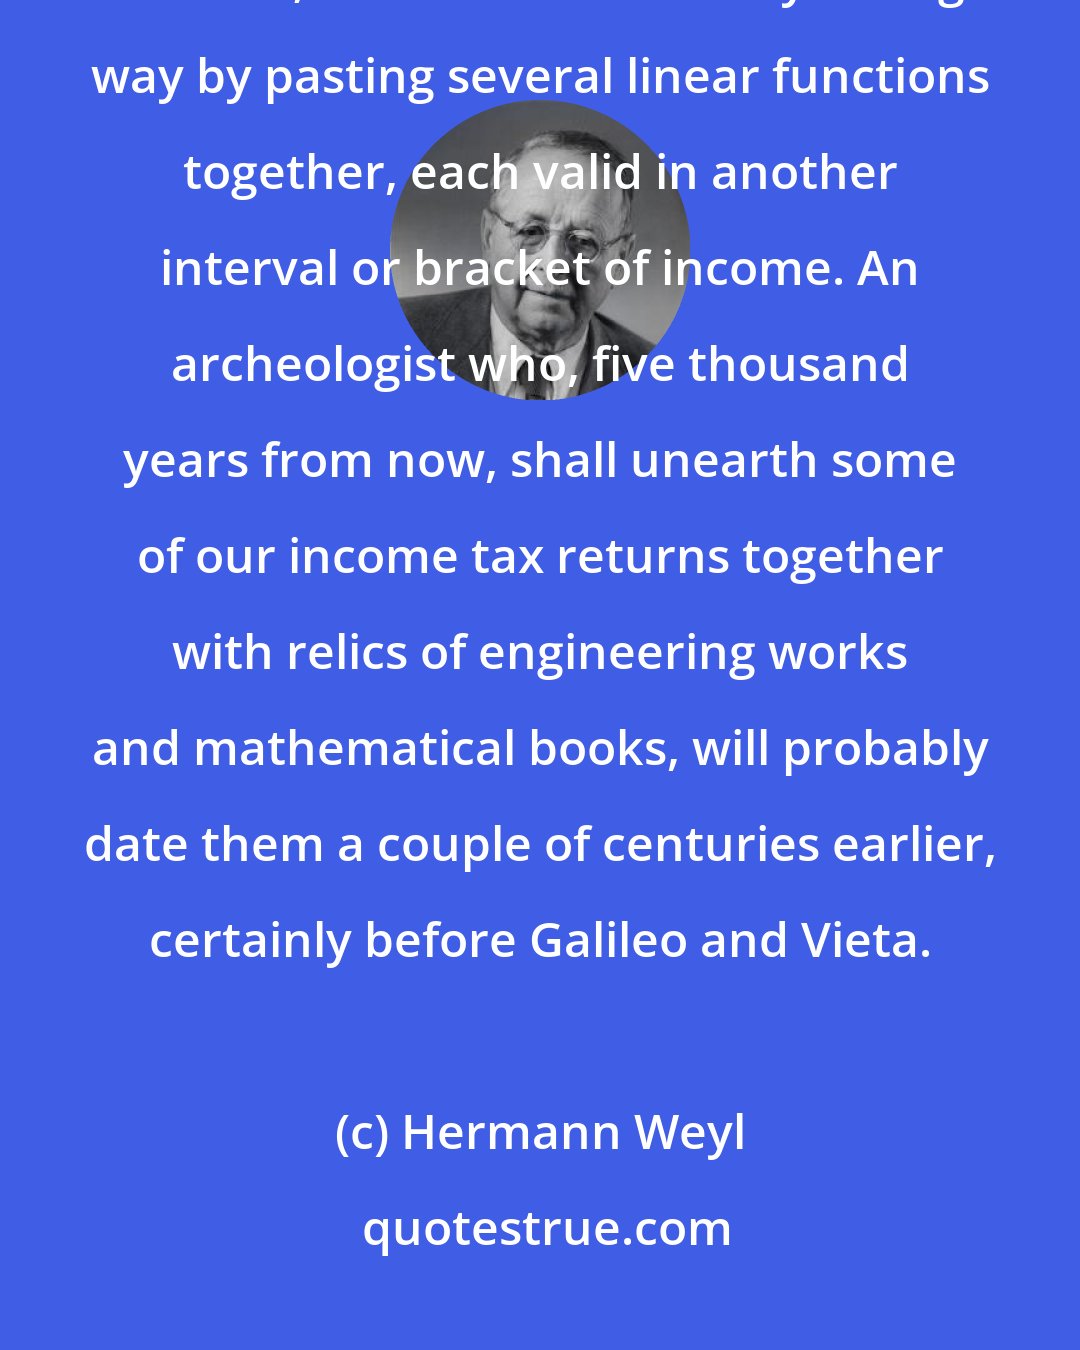 Hermann Weyl: Our federal income tax law defines the tax y to be paid in terms of the income x; it does so in a clumsy enough way by pasting several linear functions together, each valid in another interval or bracket of income. An archeologist who, five thousand years from now, shall unearth some of our income tax returns together with relics of engineering works and mathematical books, will probably date them a couple of centuries earlier, certainly before Galileo and Vieta.